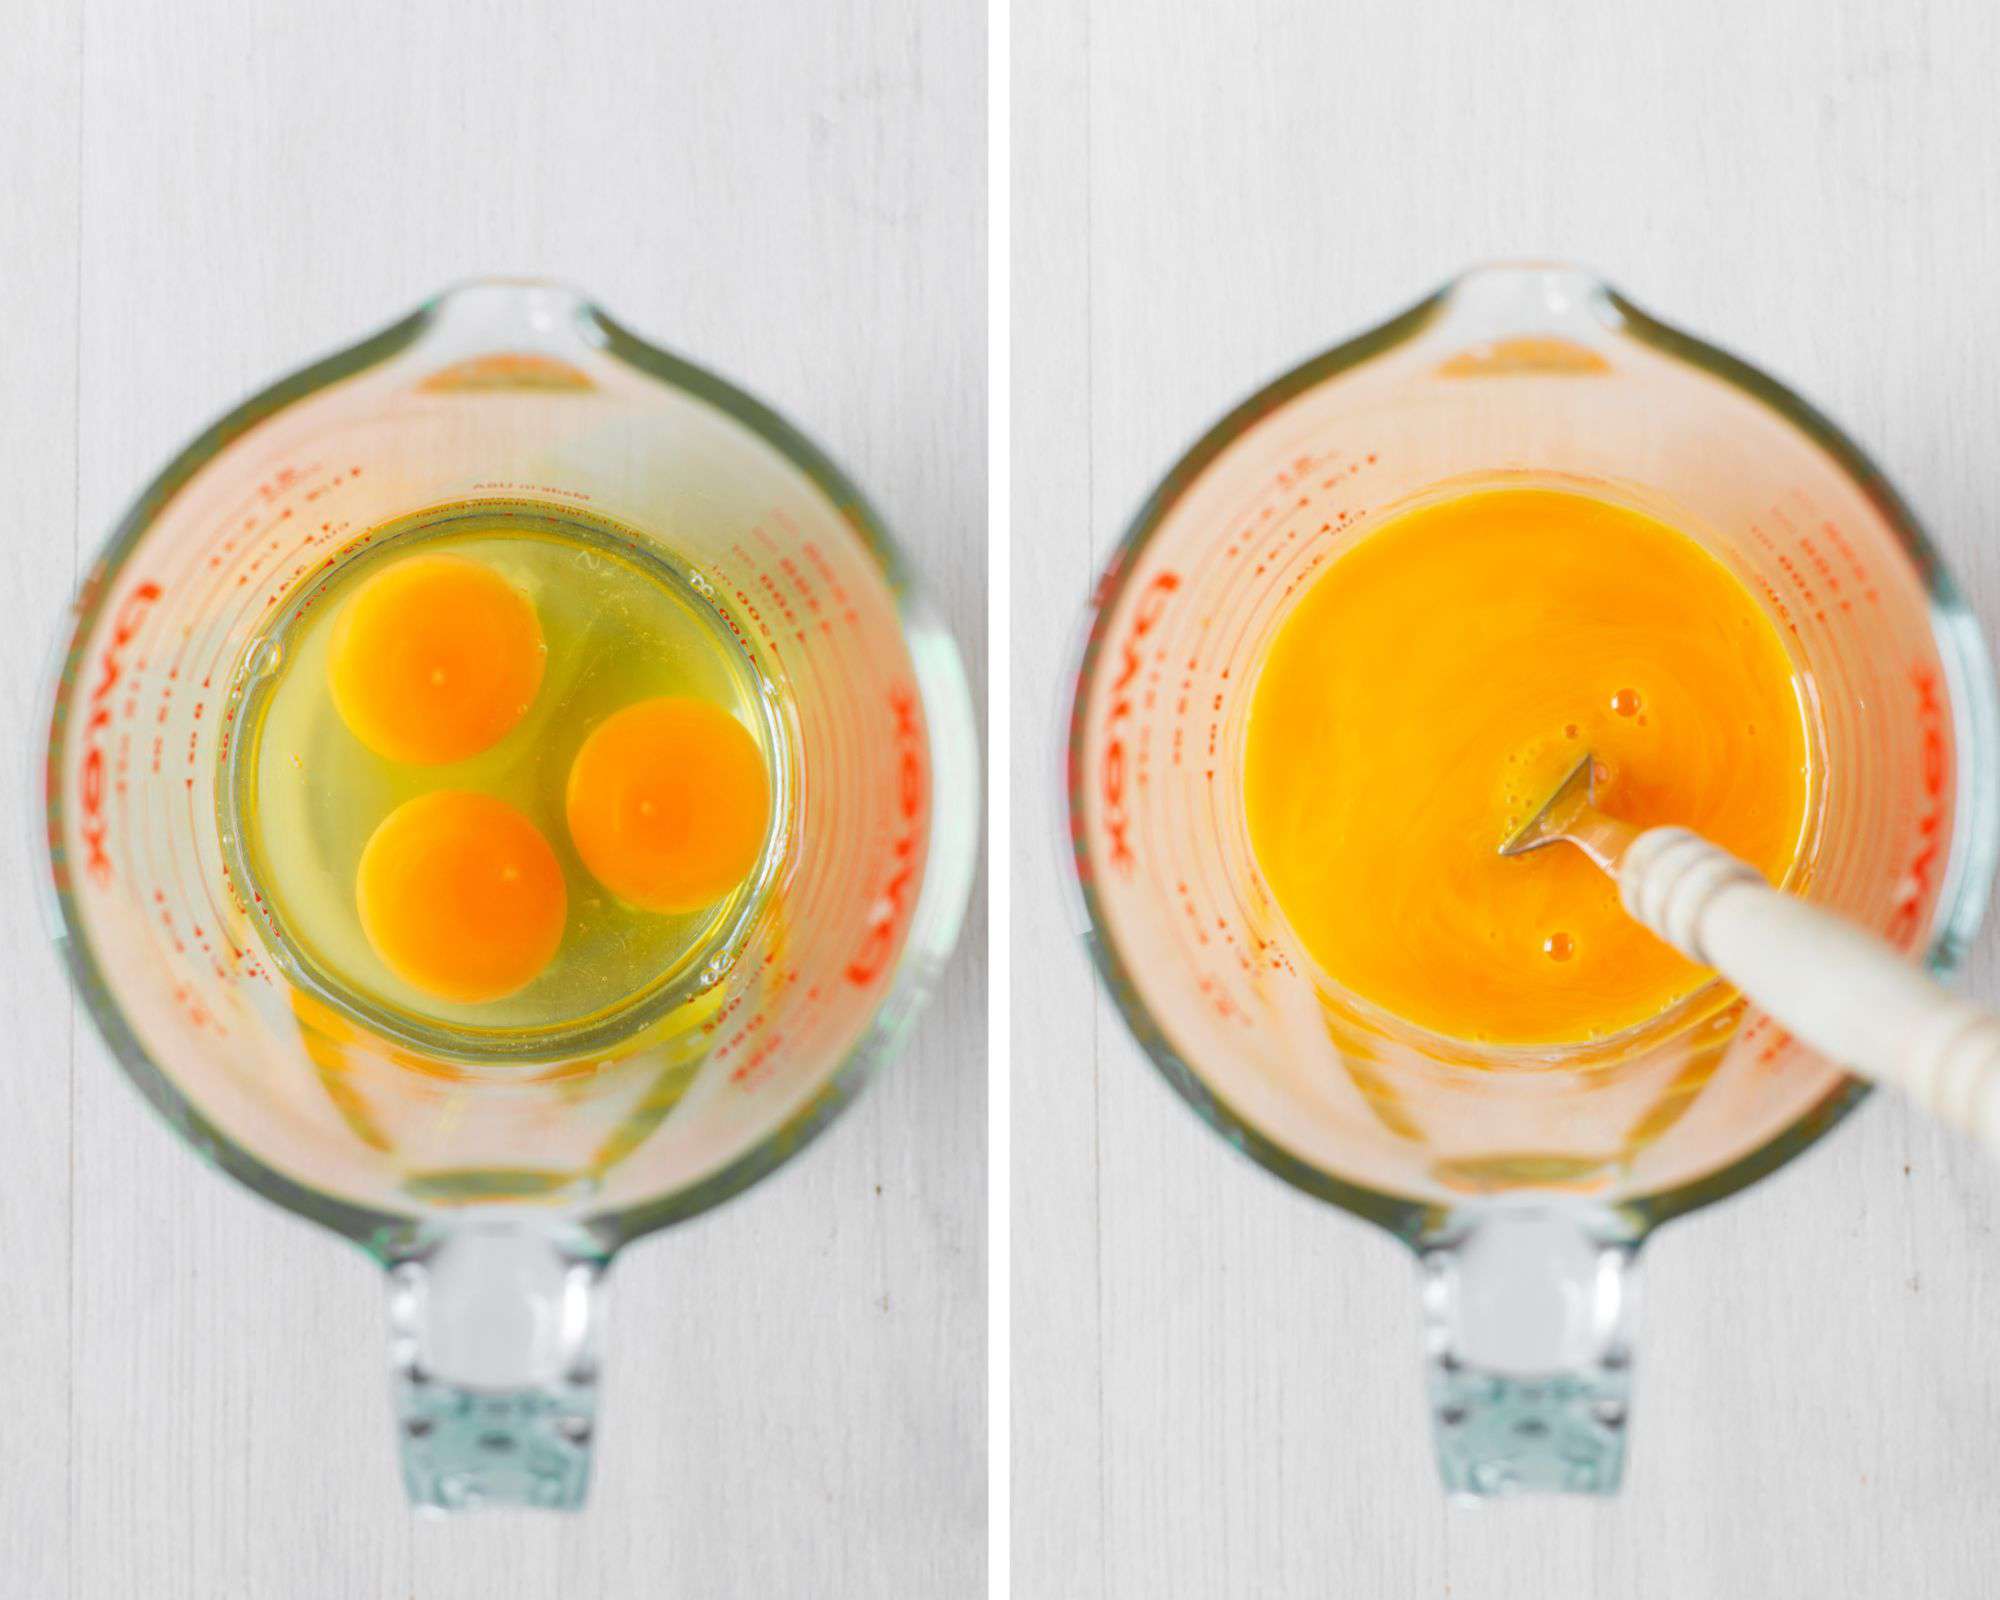 Eggs whisked in glass jug.